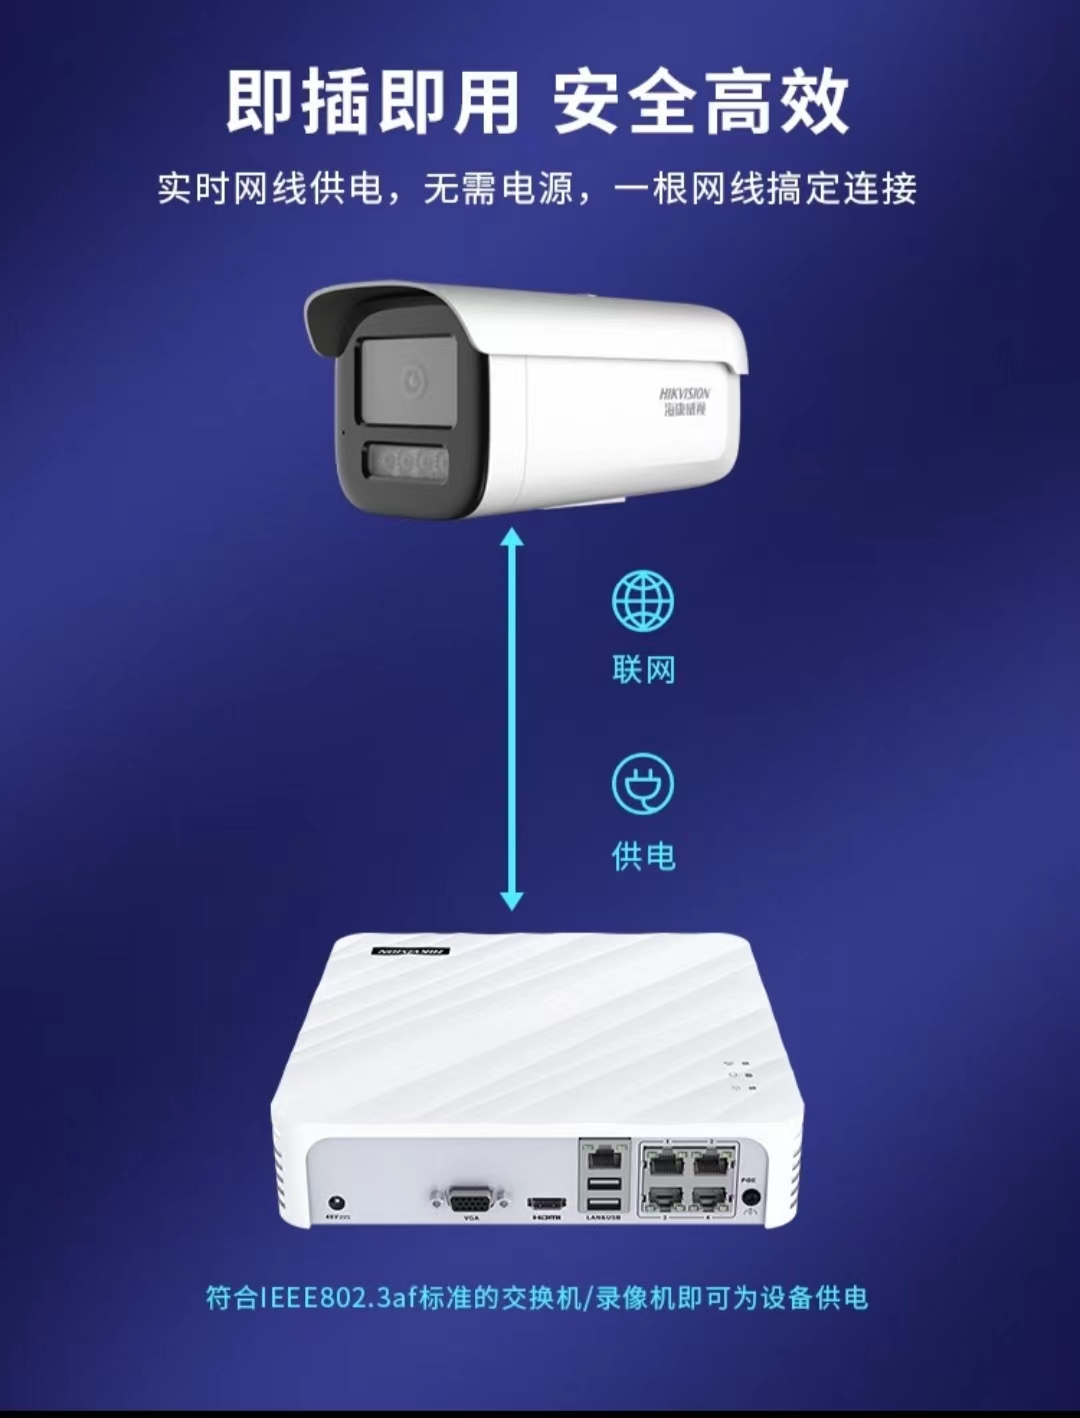 Haikang 2 million POE monitoring camera waterproof and dustproof dual light full color night vision DS-2CD3T26WDV3-L